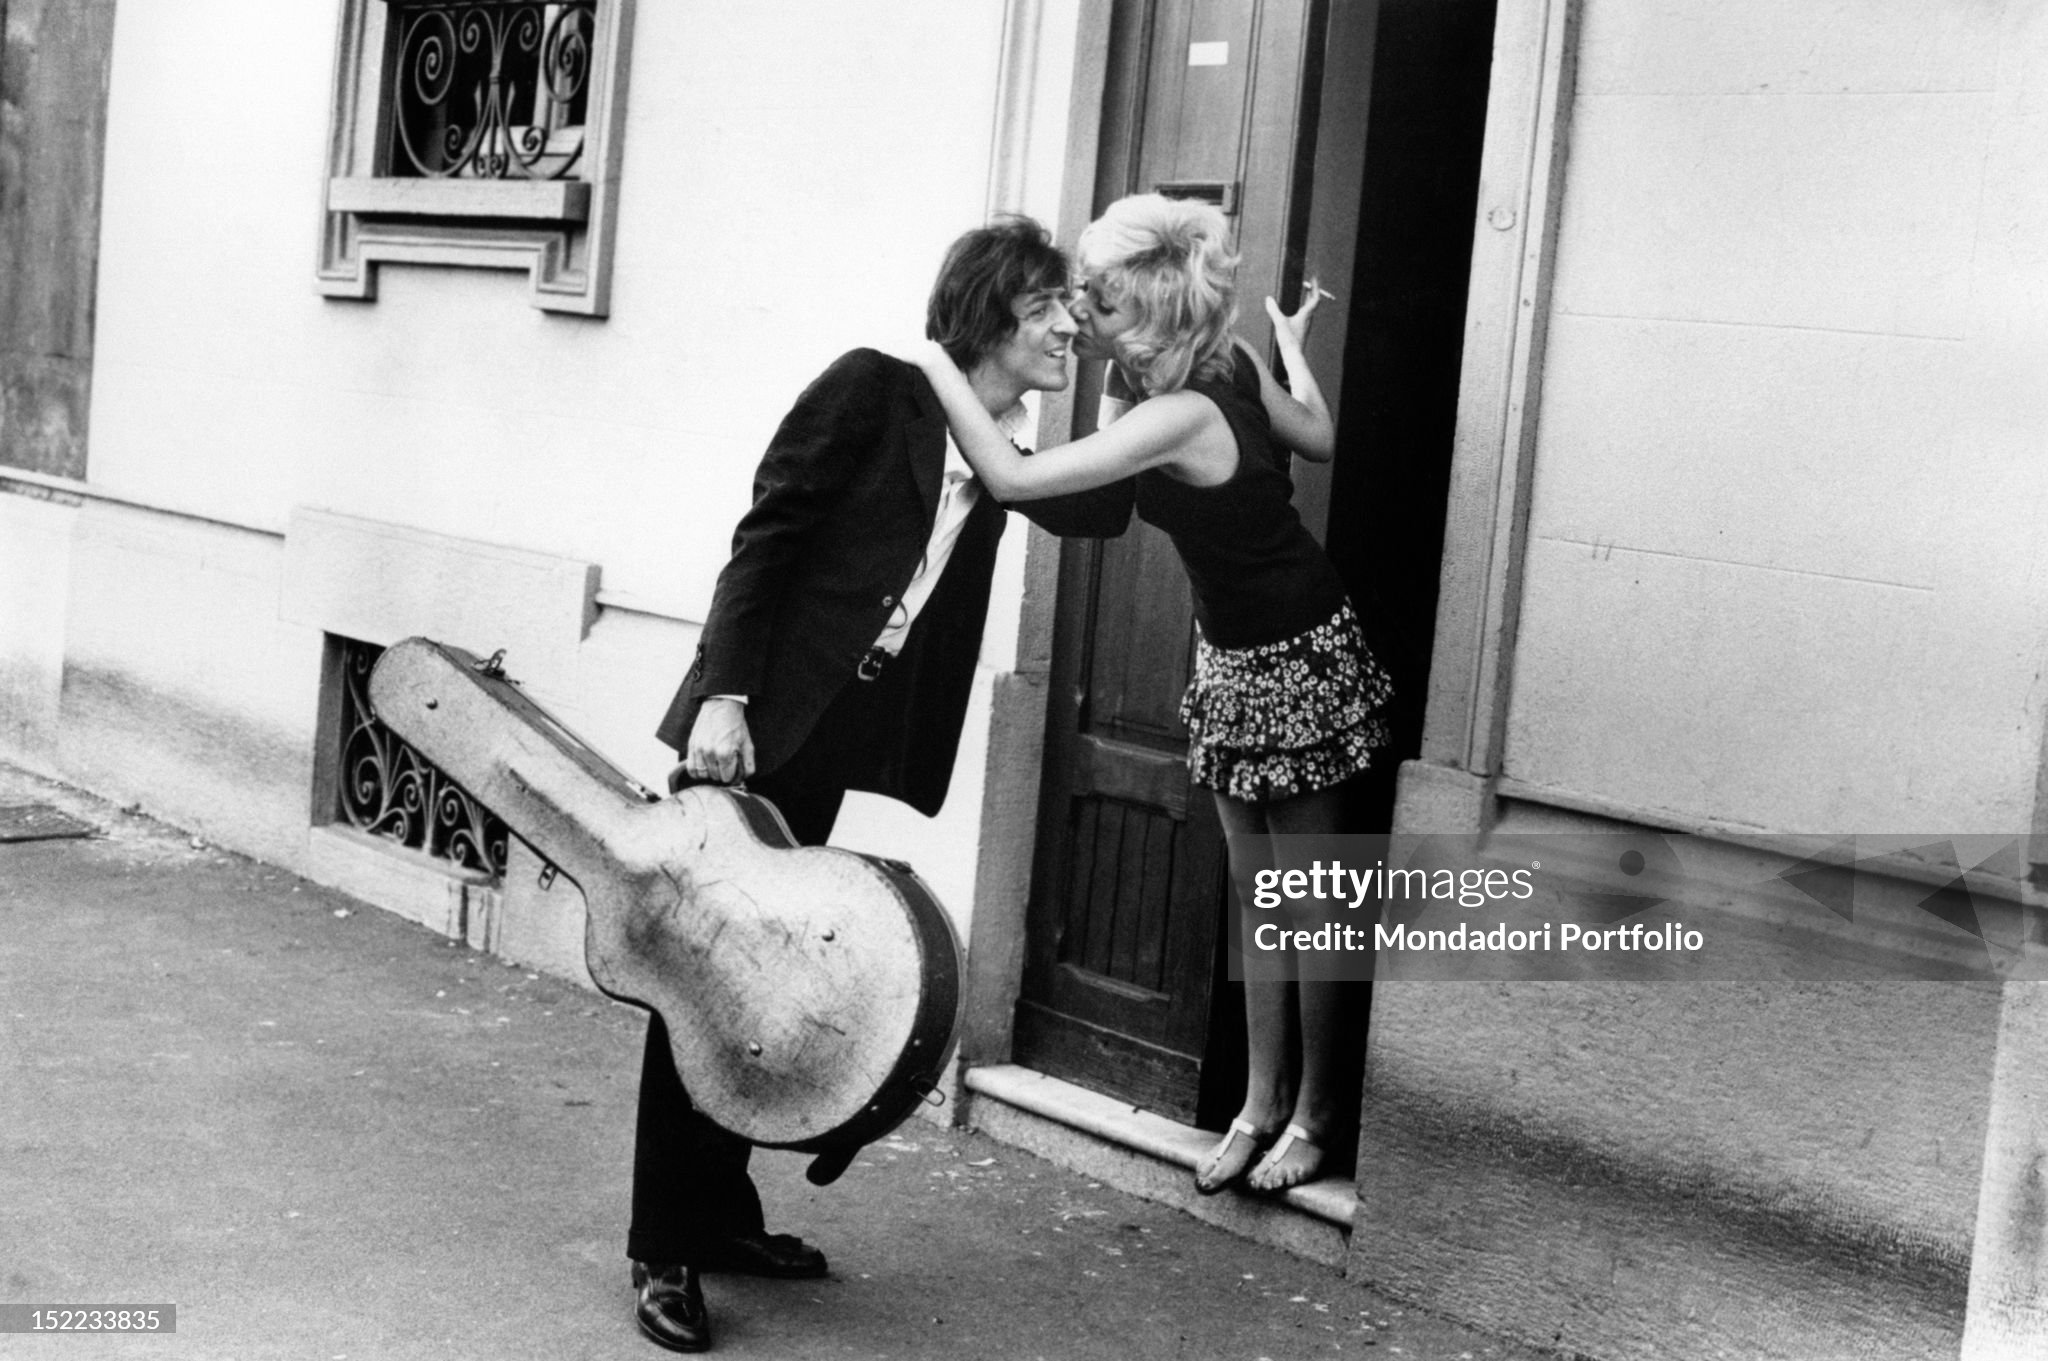 Italian songwriter, singer, actor and guitarist Giorgio Gaber (Giorgio Gaberscik) kissed by his wife, the Italian actress Ombretta Colli (Ombretta Comelli), on their doorstep in Milan in 1970s. 